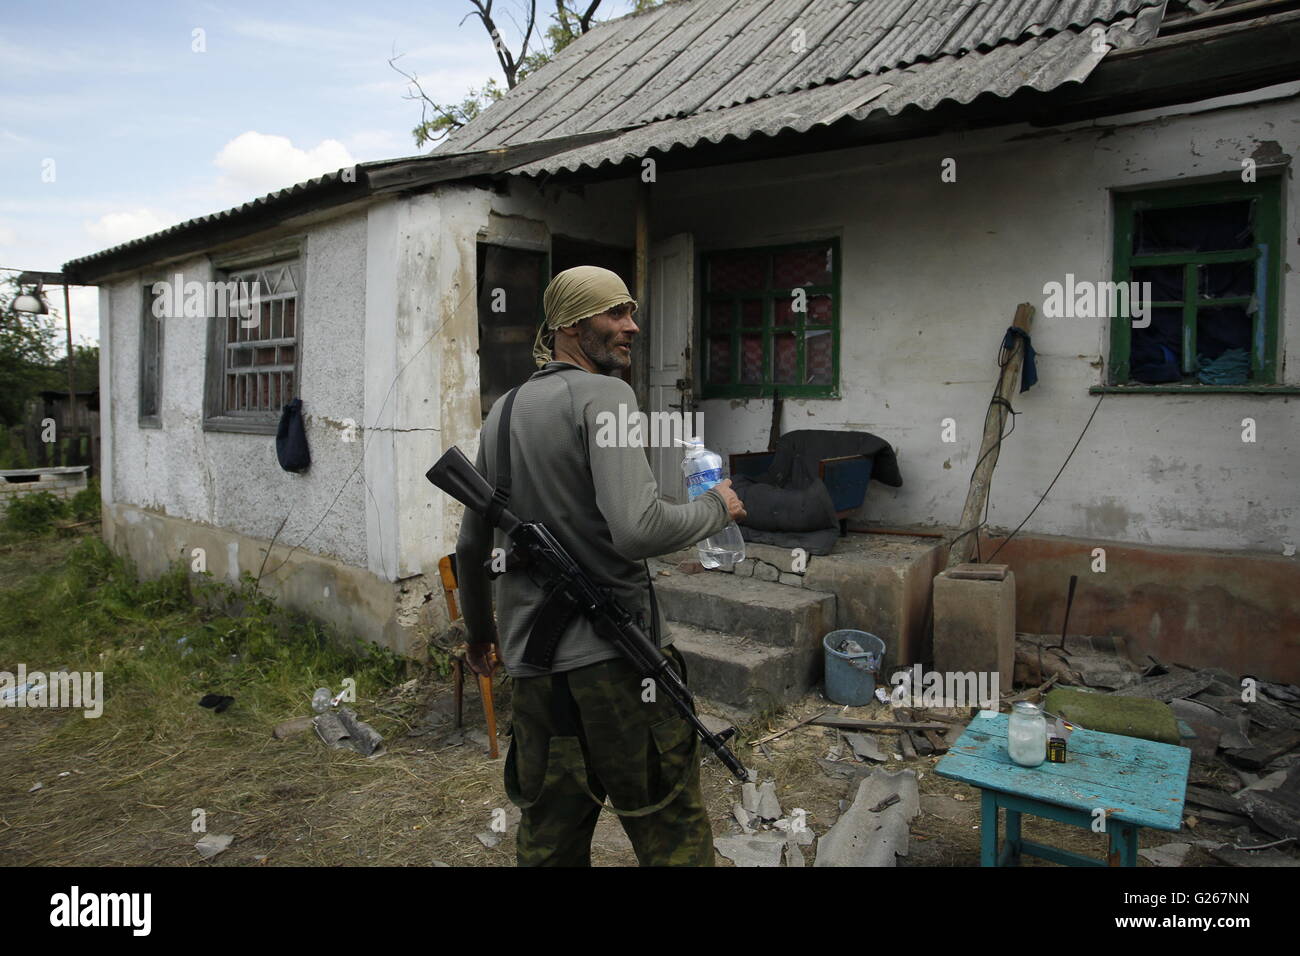 Donetsk, Ukraine. 24th May, 2016. An armed man estimates destroyed home after shelling in rebels controlled Staromykhaylivka village near Donetsk, Ukraine, May 24, 2016. Kremlin spokesman Dmitry Peskov confirmed that the Special Monitoring Mission to Ukraine under the Organization for Security and Co-operation in Europe is being discussed. Credit:  Alexander Ermochenko/Xinhua/Alamy Live News Stock Photo